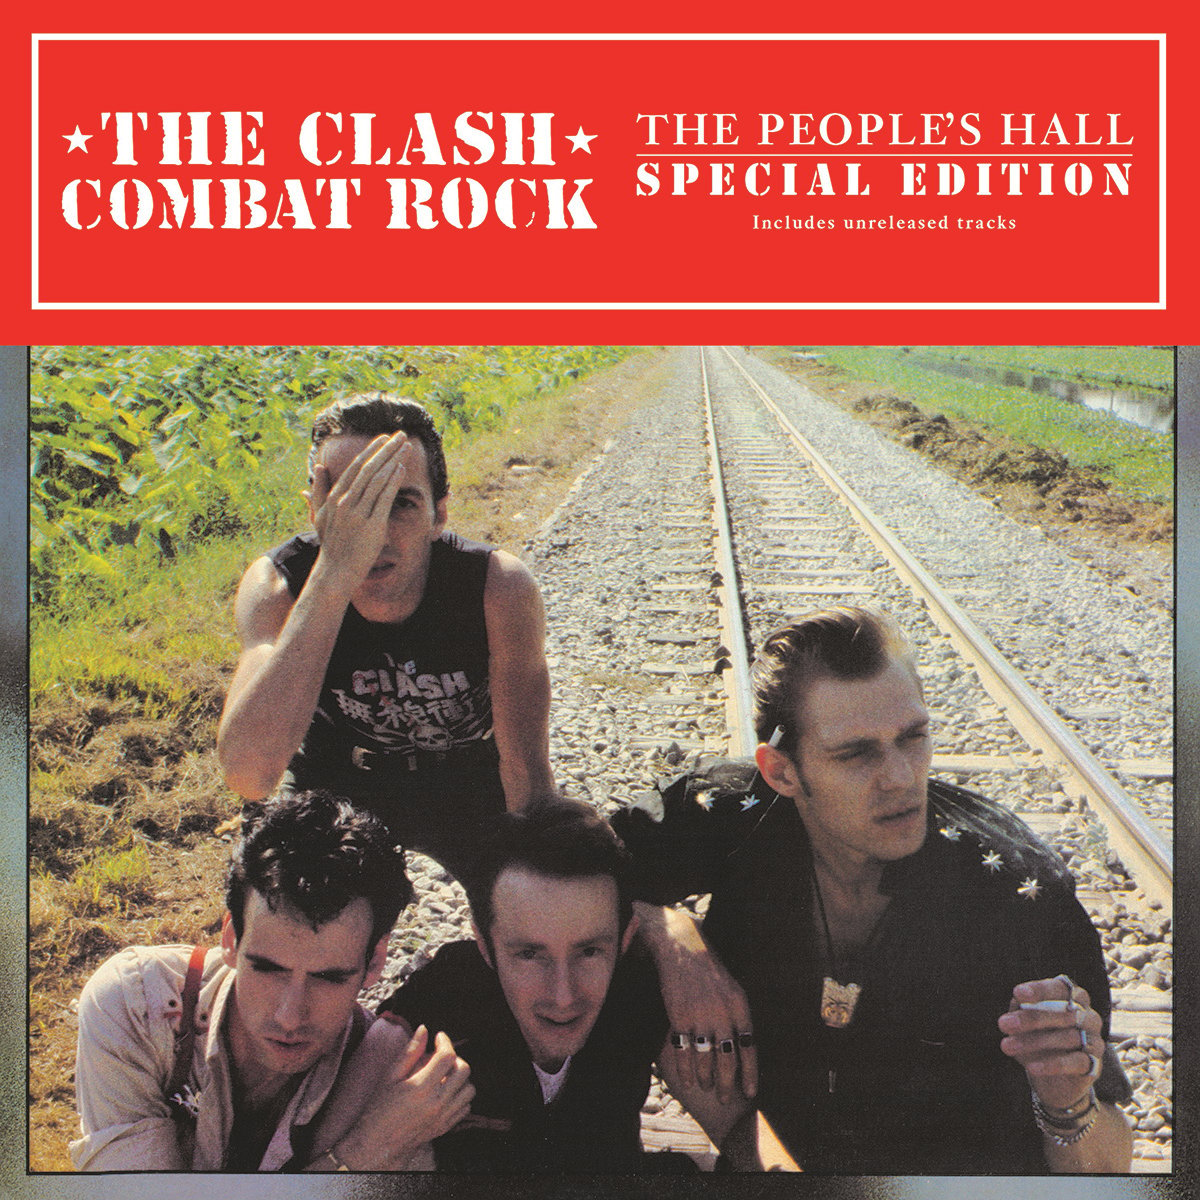 The Clash ‘Combat Rock / The People’s Hall’ A Special Edition Available From May 20th￼￼